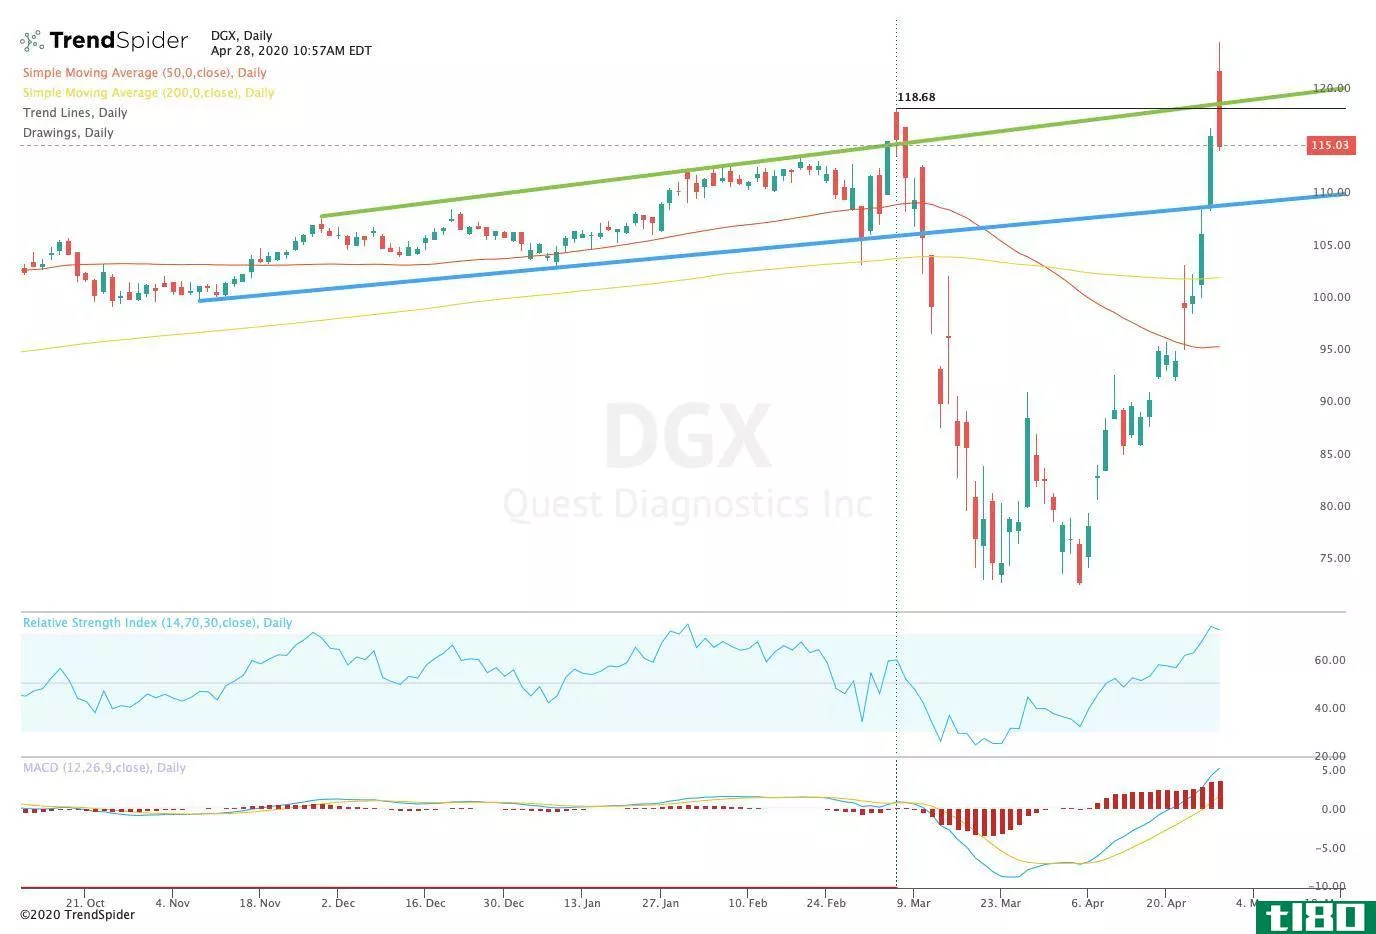 Chart showing the share price performance of Quest Diagnostics Incorporated (DGX)